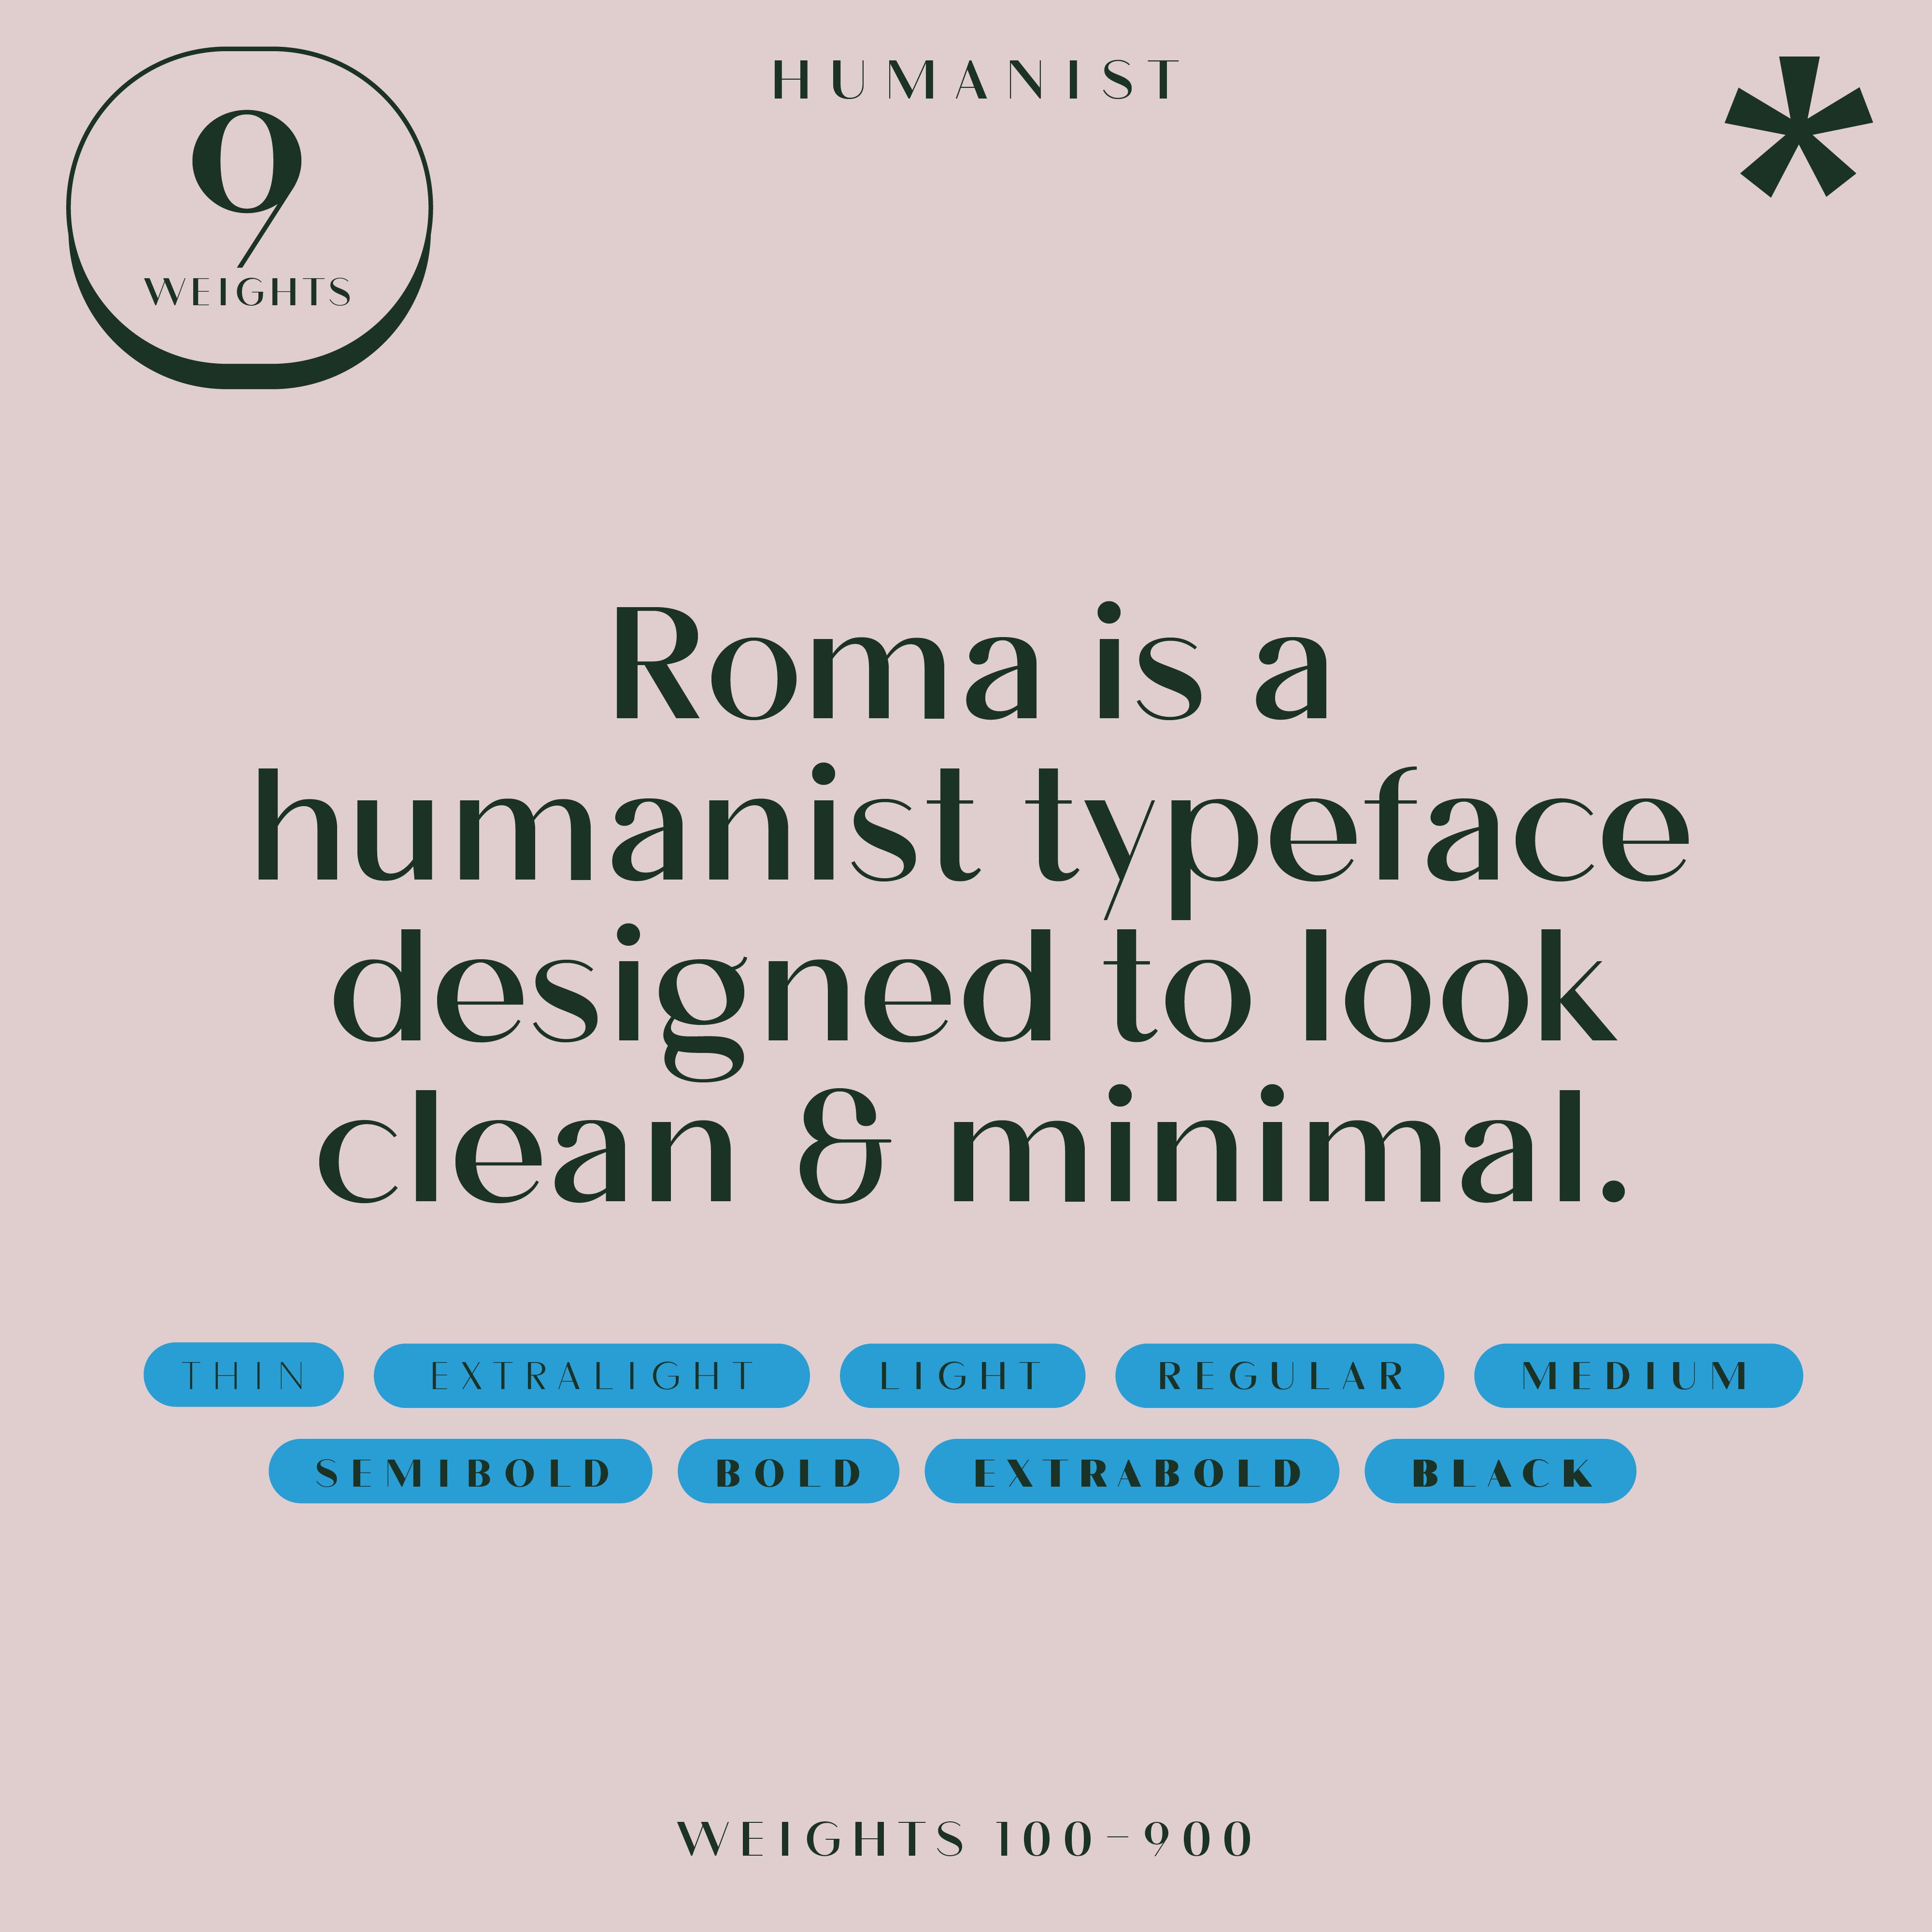 Roma humanist type font weights